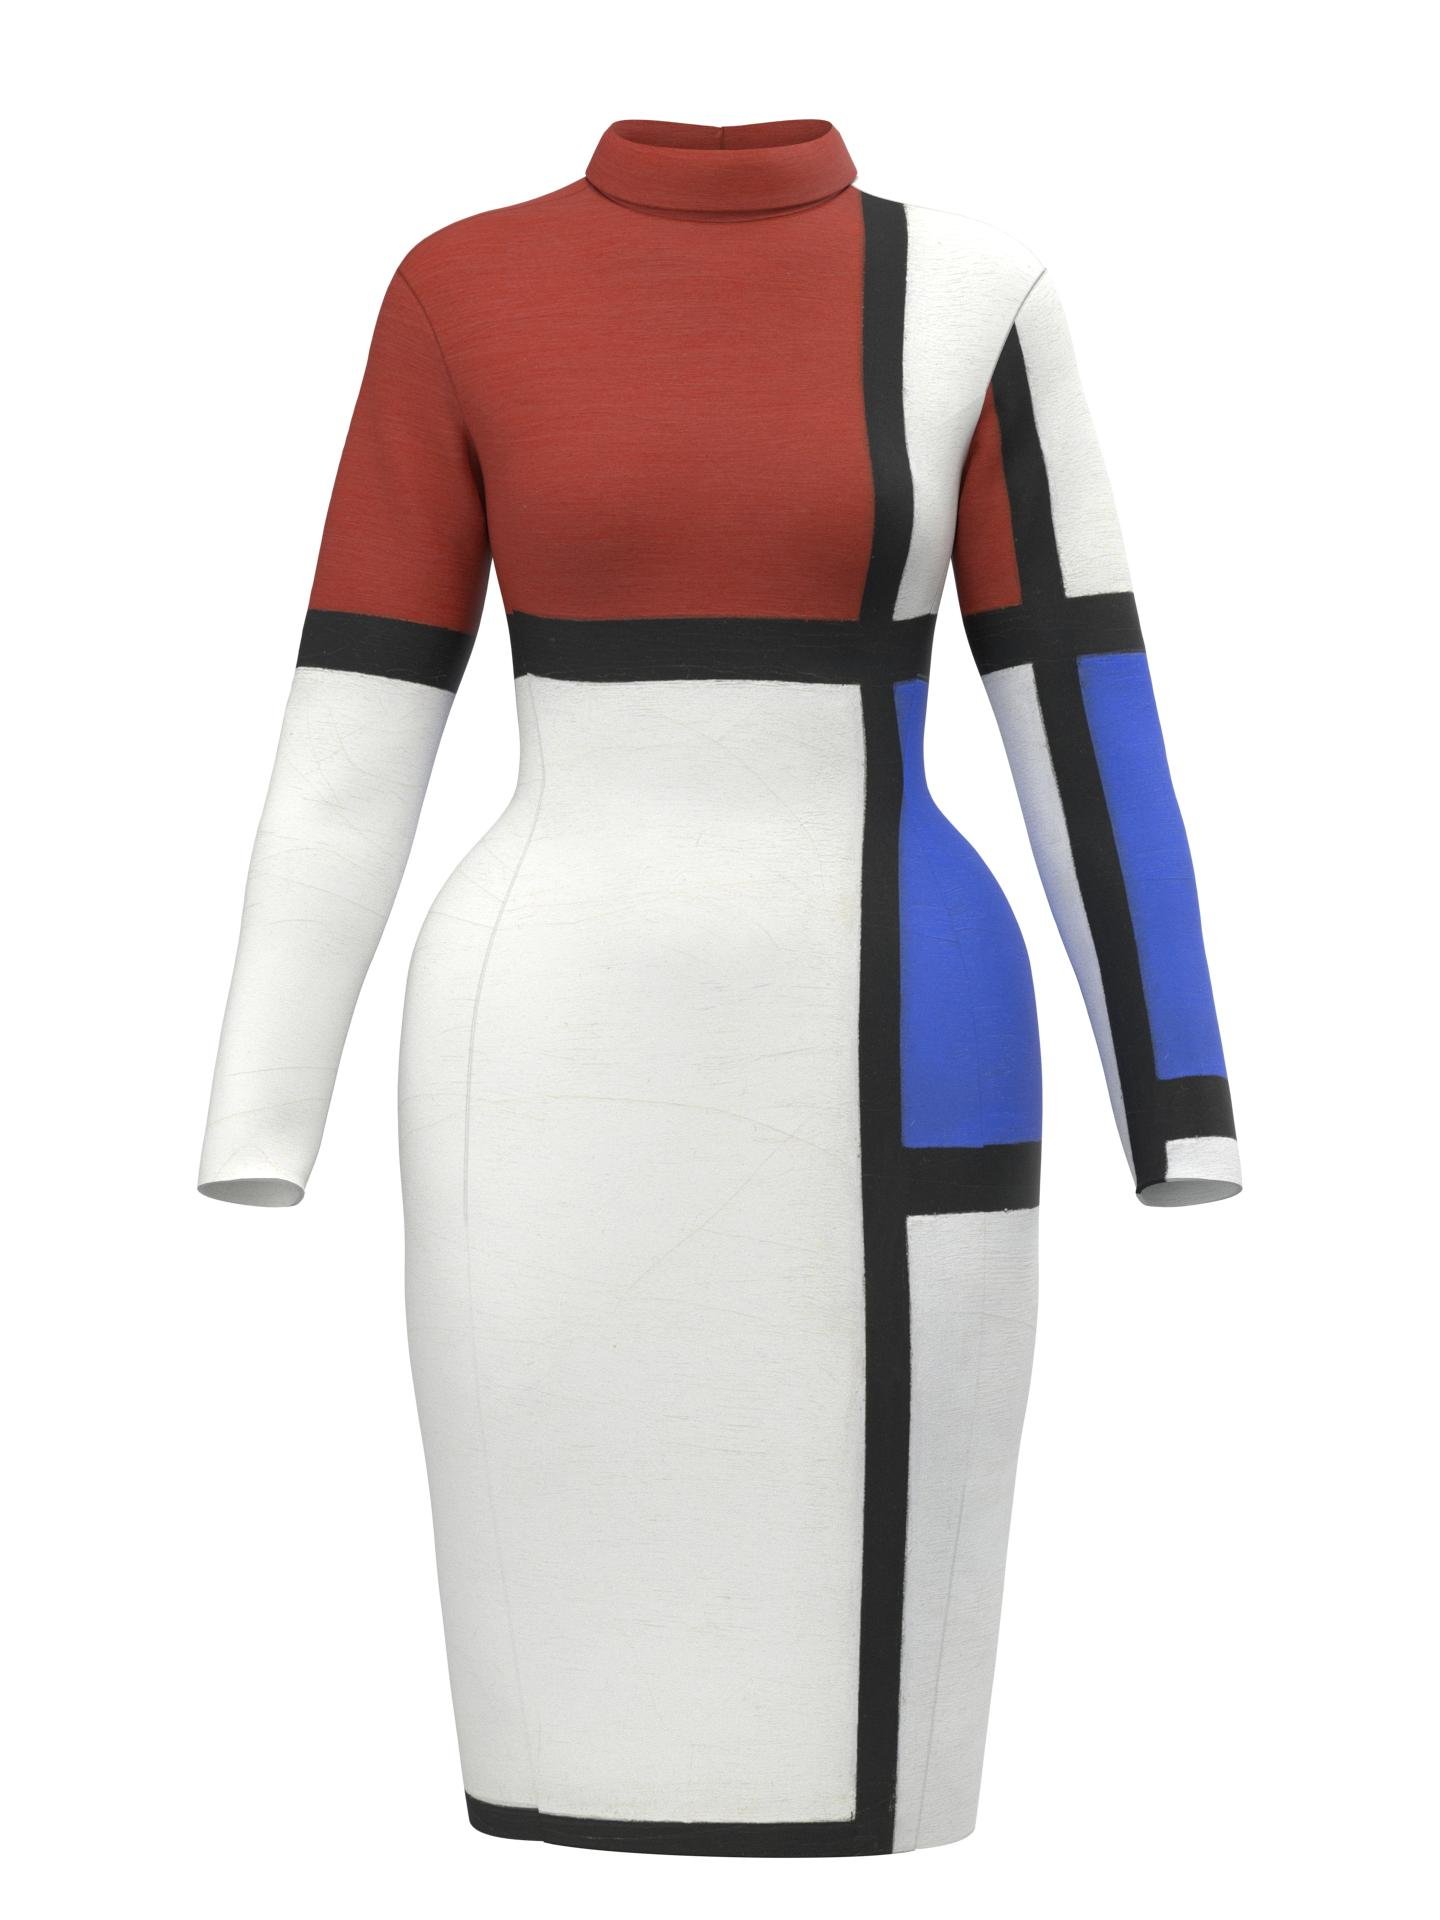 Space Dress- Composition No. II with Red and Blue by DRESSX